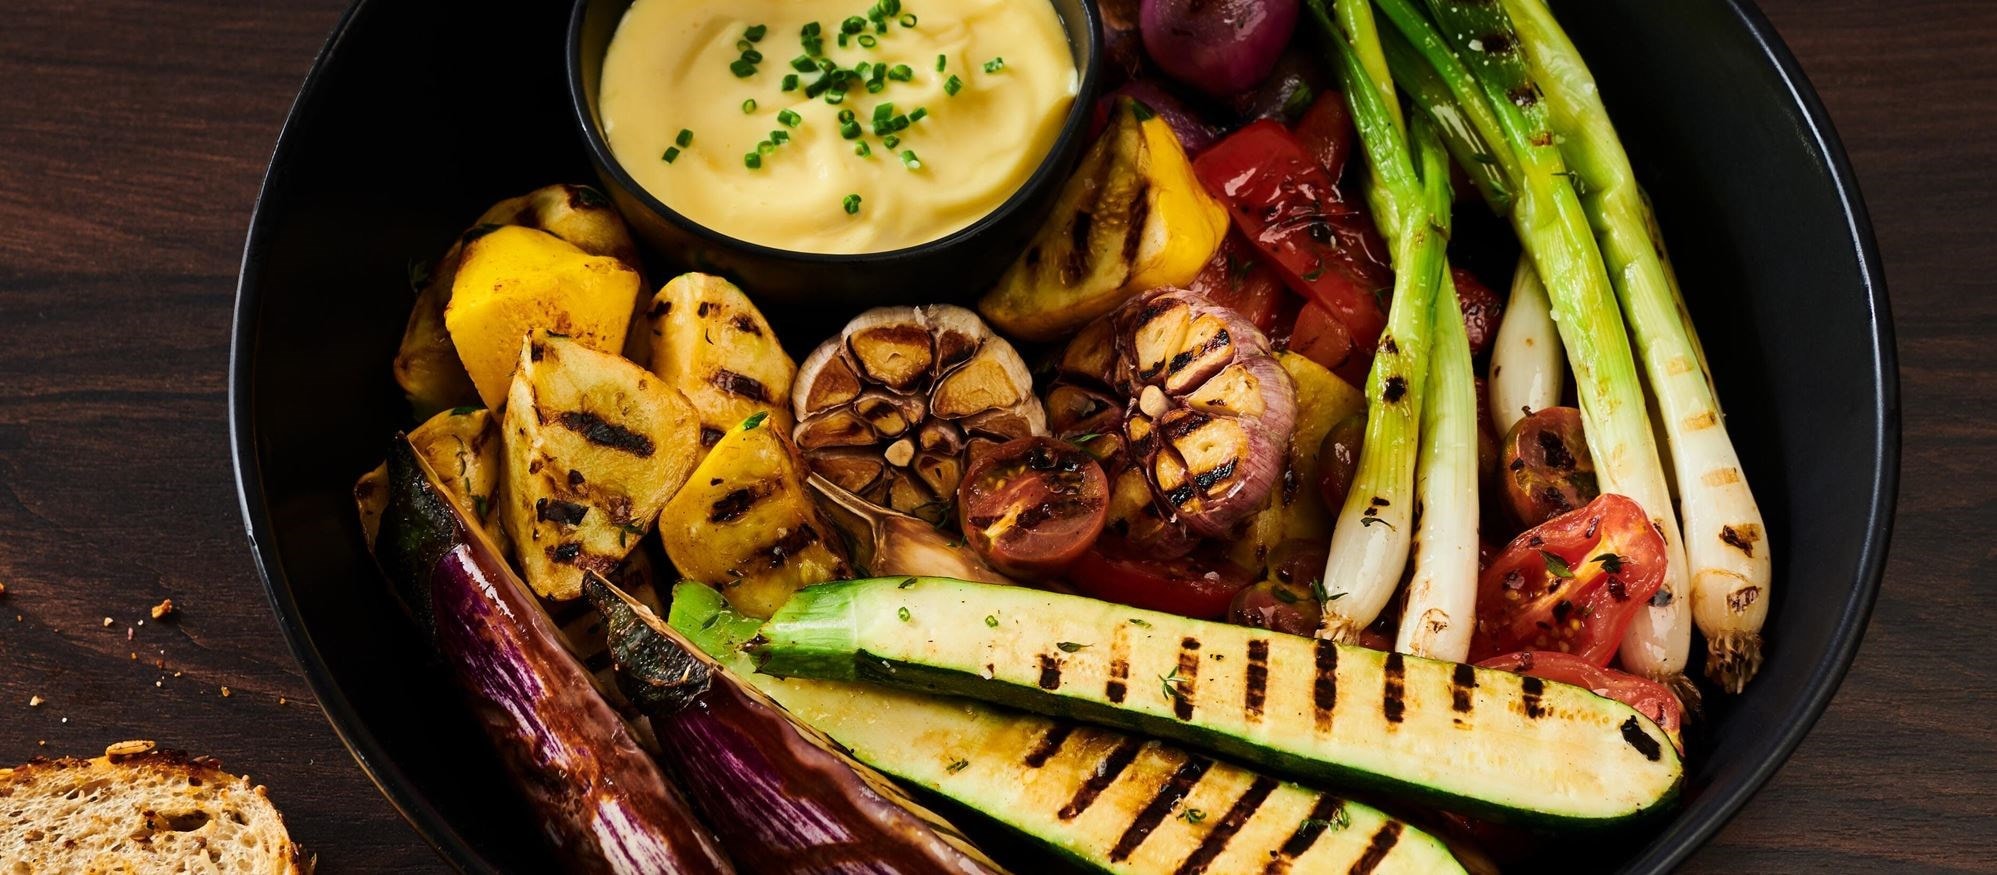 Easy and delicious Grilled Vegetables with Garlic Aioli recipe using the Charbroiler Mode setting of your Wolf Dual Fuel Range